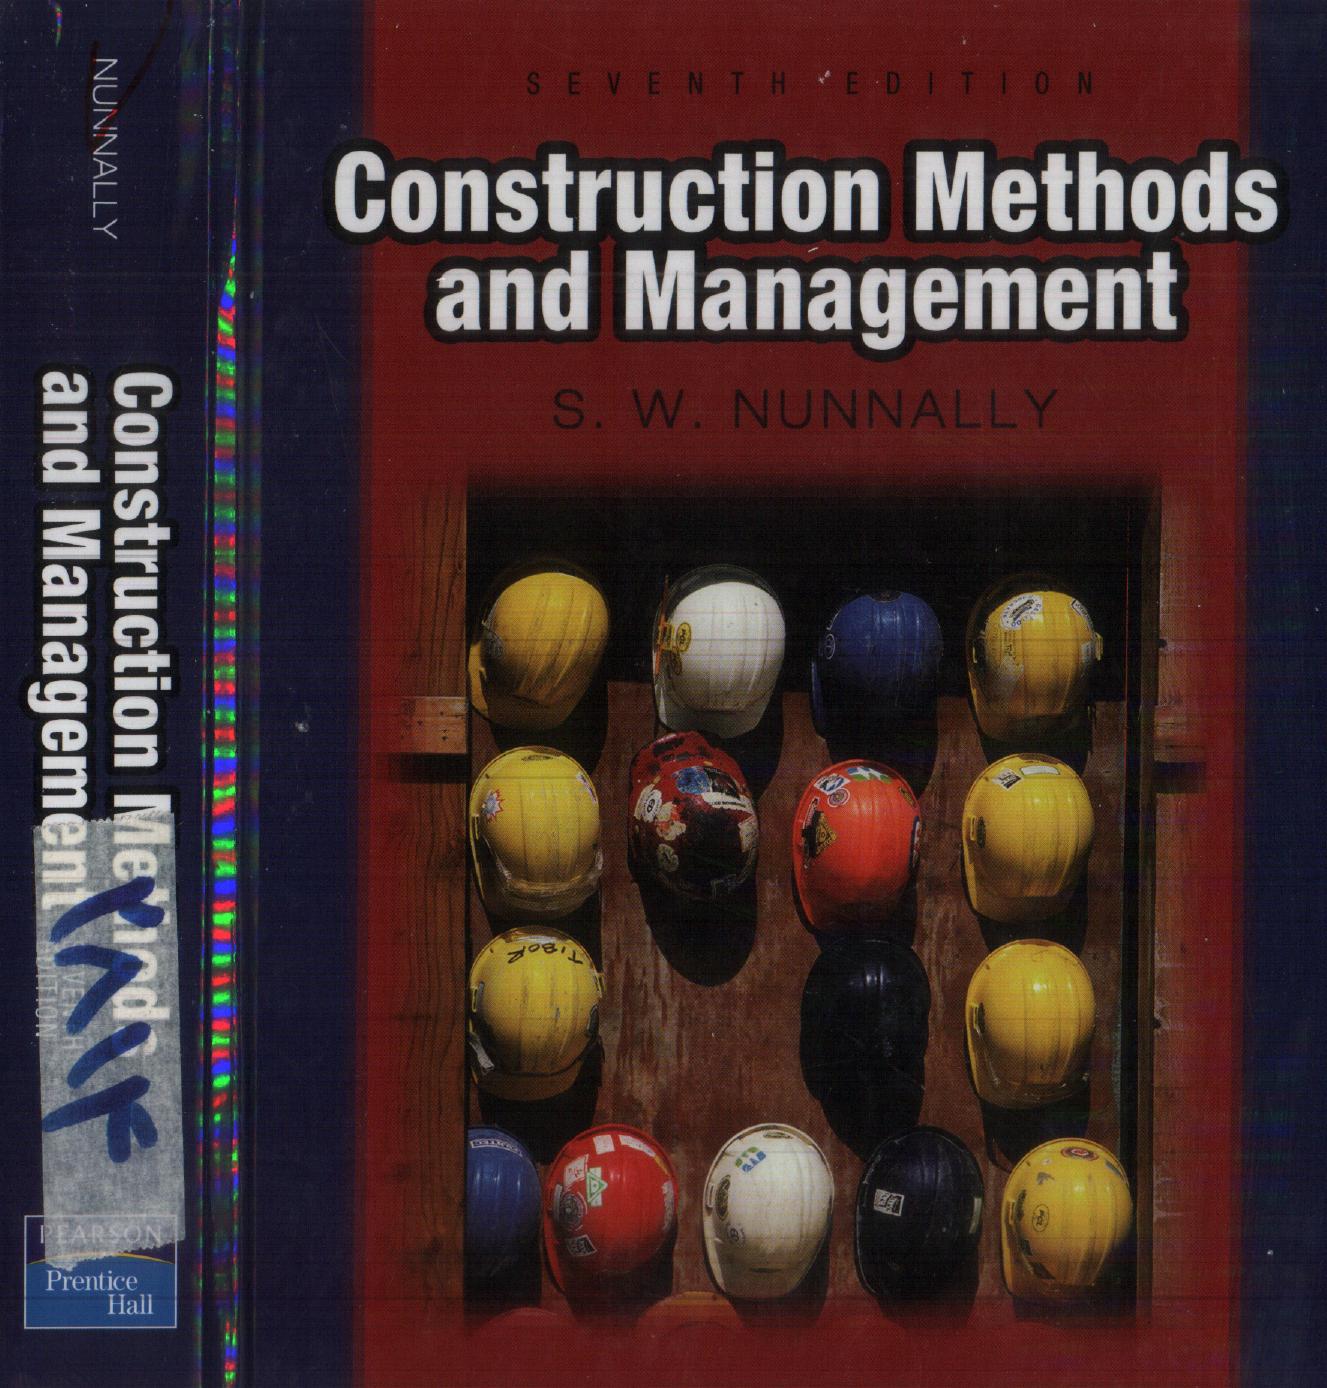 -Construction Methods and Management by S. W. Nunnally  7th Edition  2007